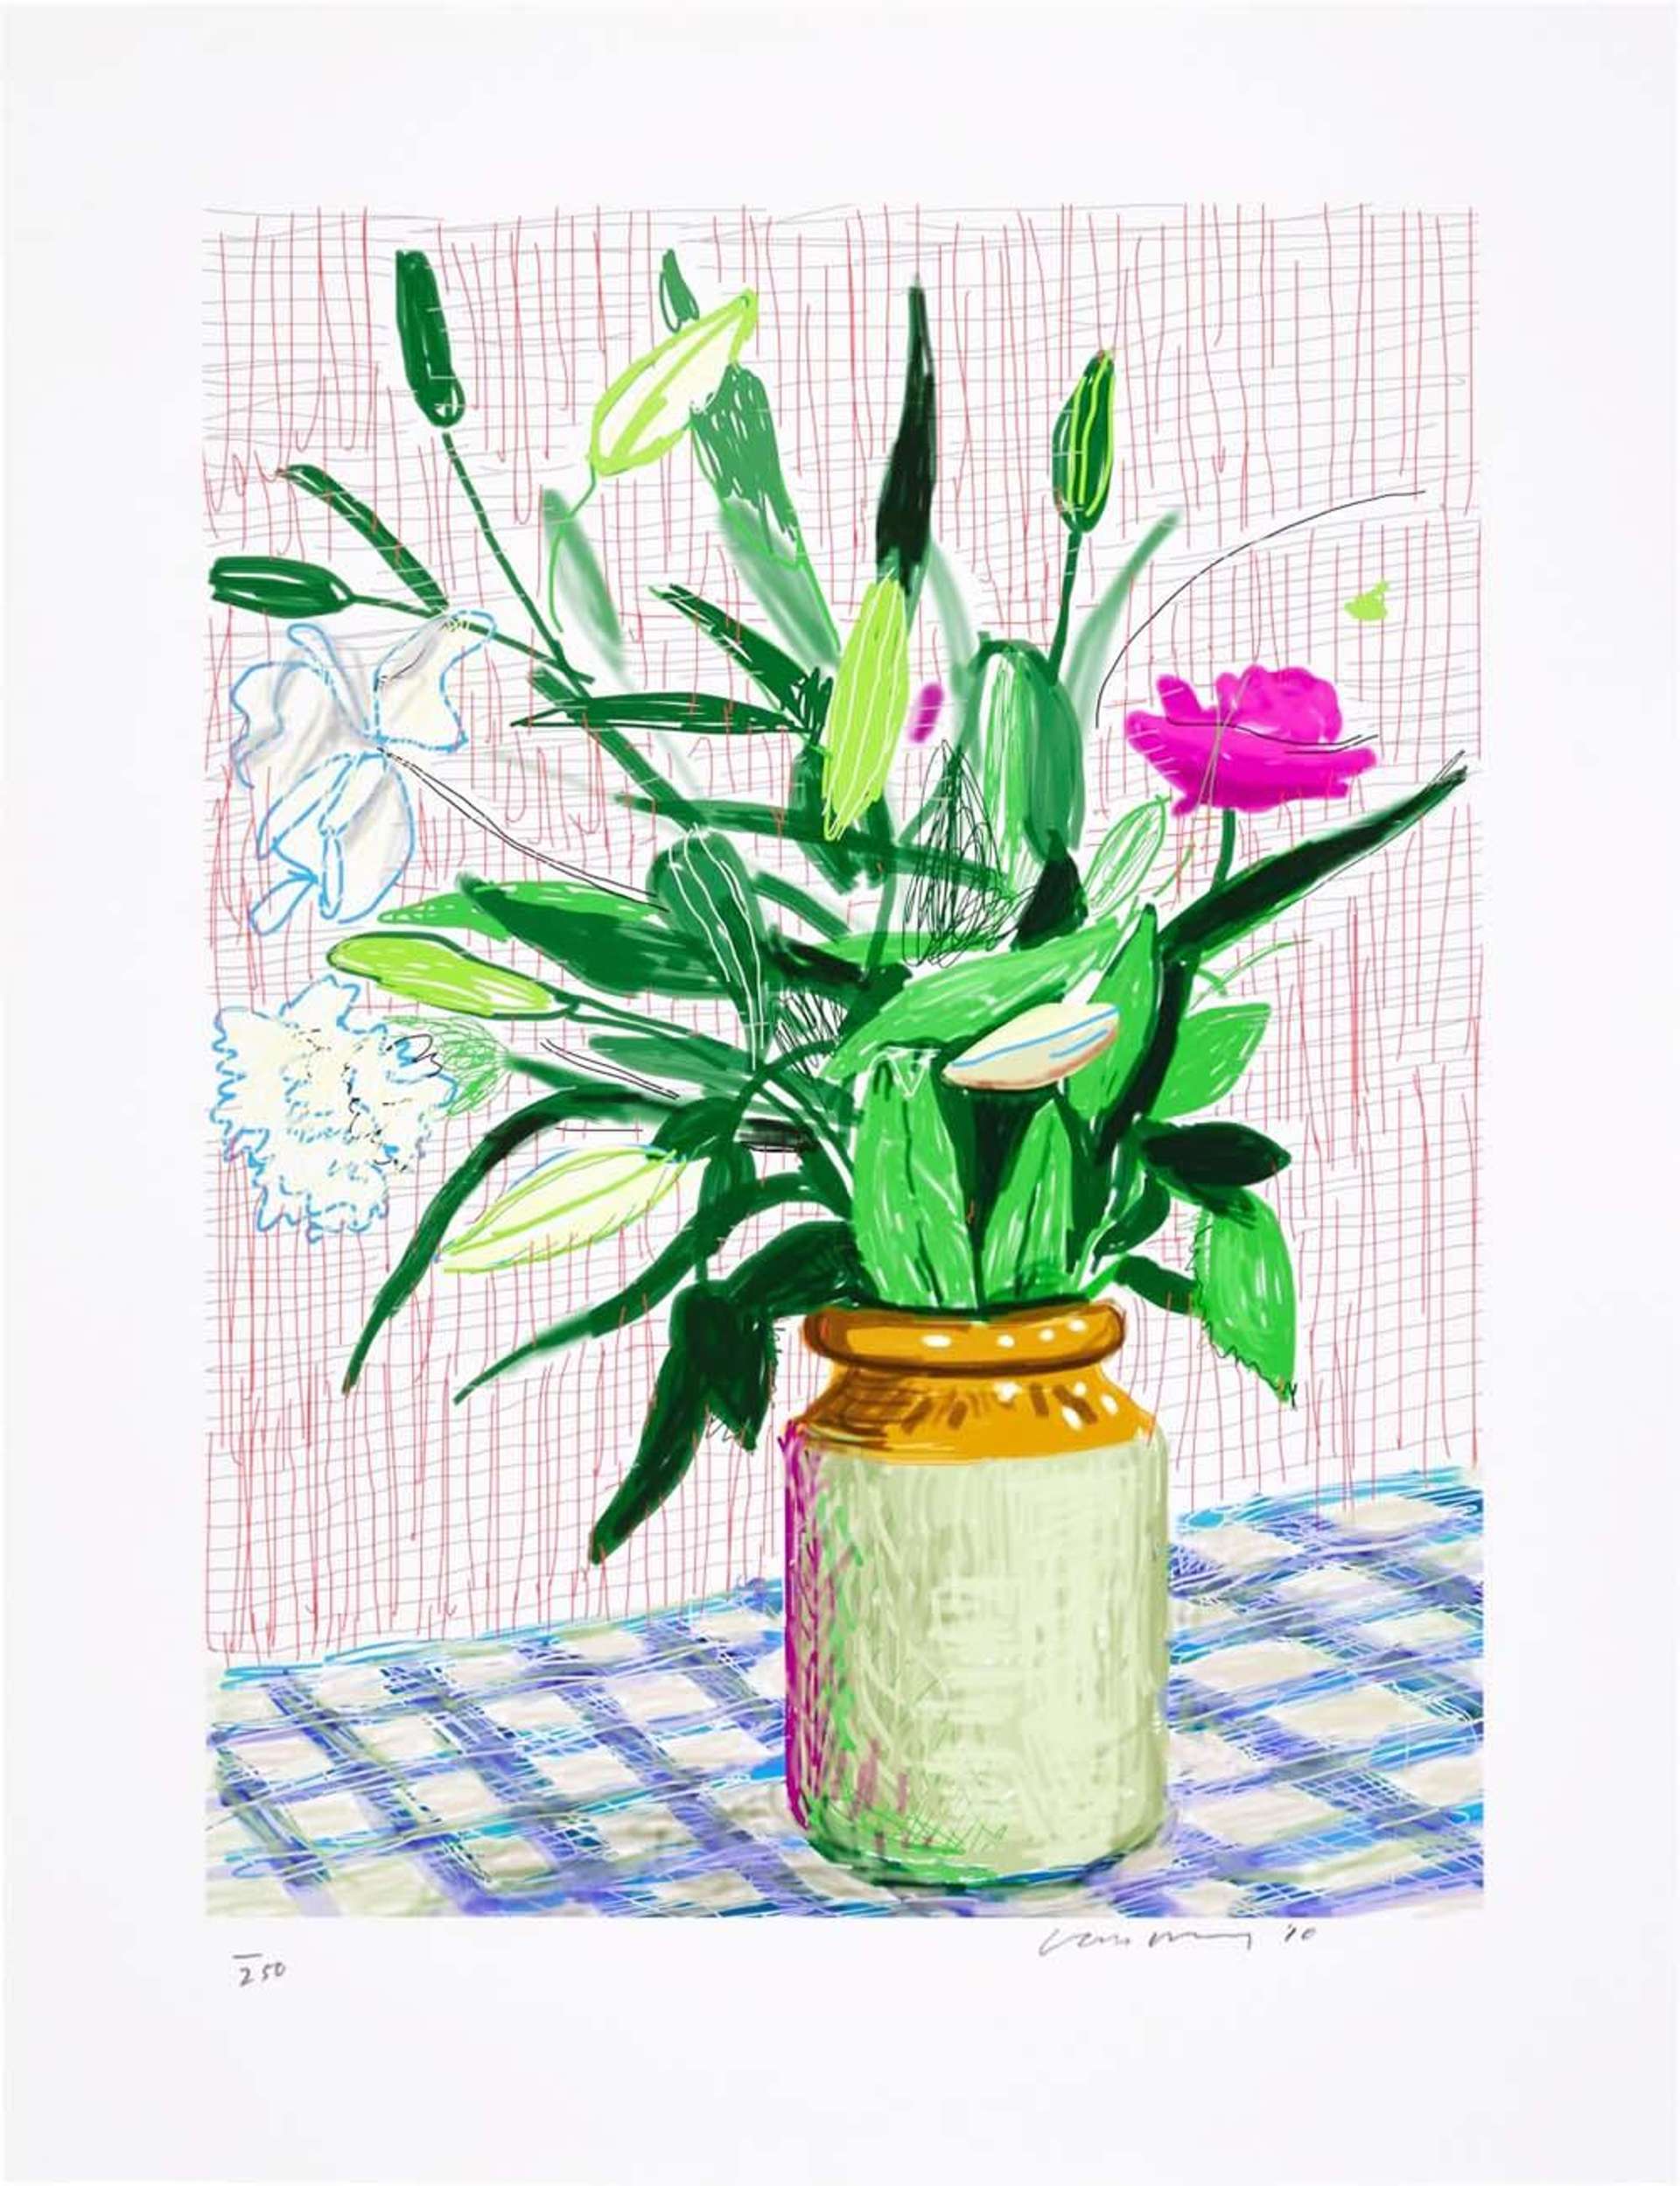 Digital artwork of flowers in a vase on a table with a blue and white checkered cloth.